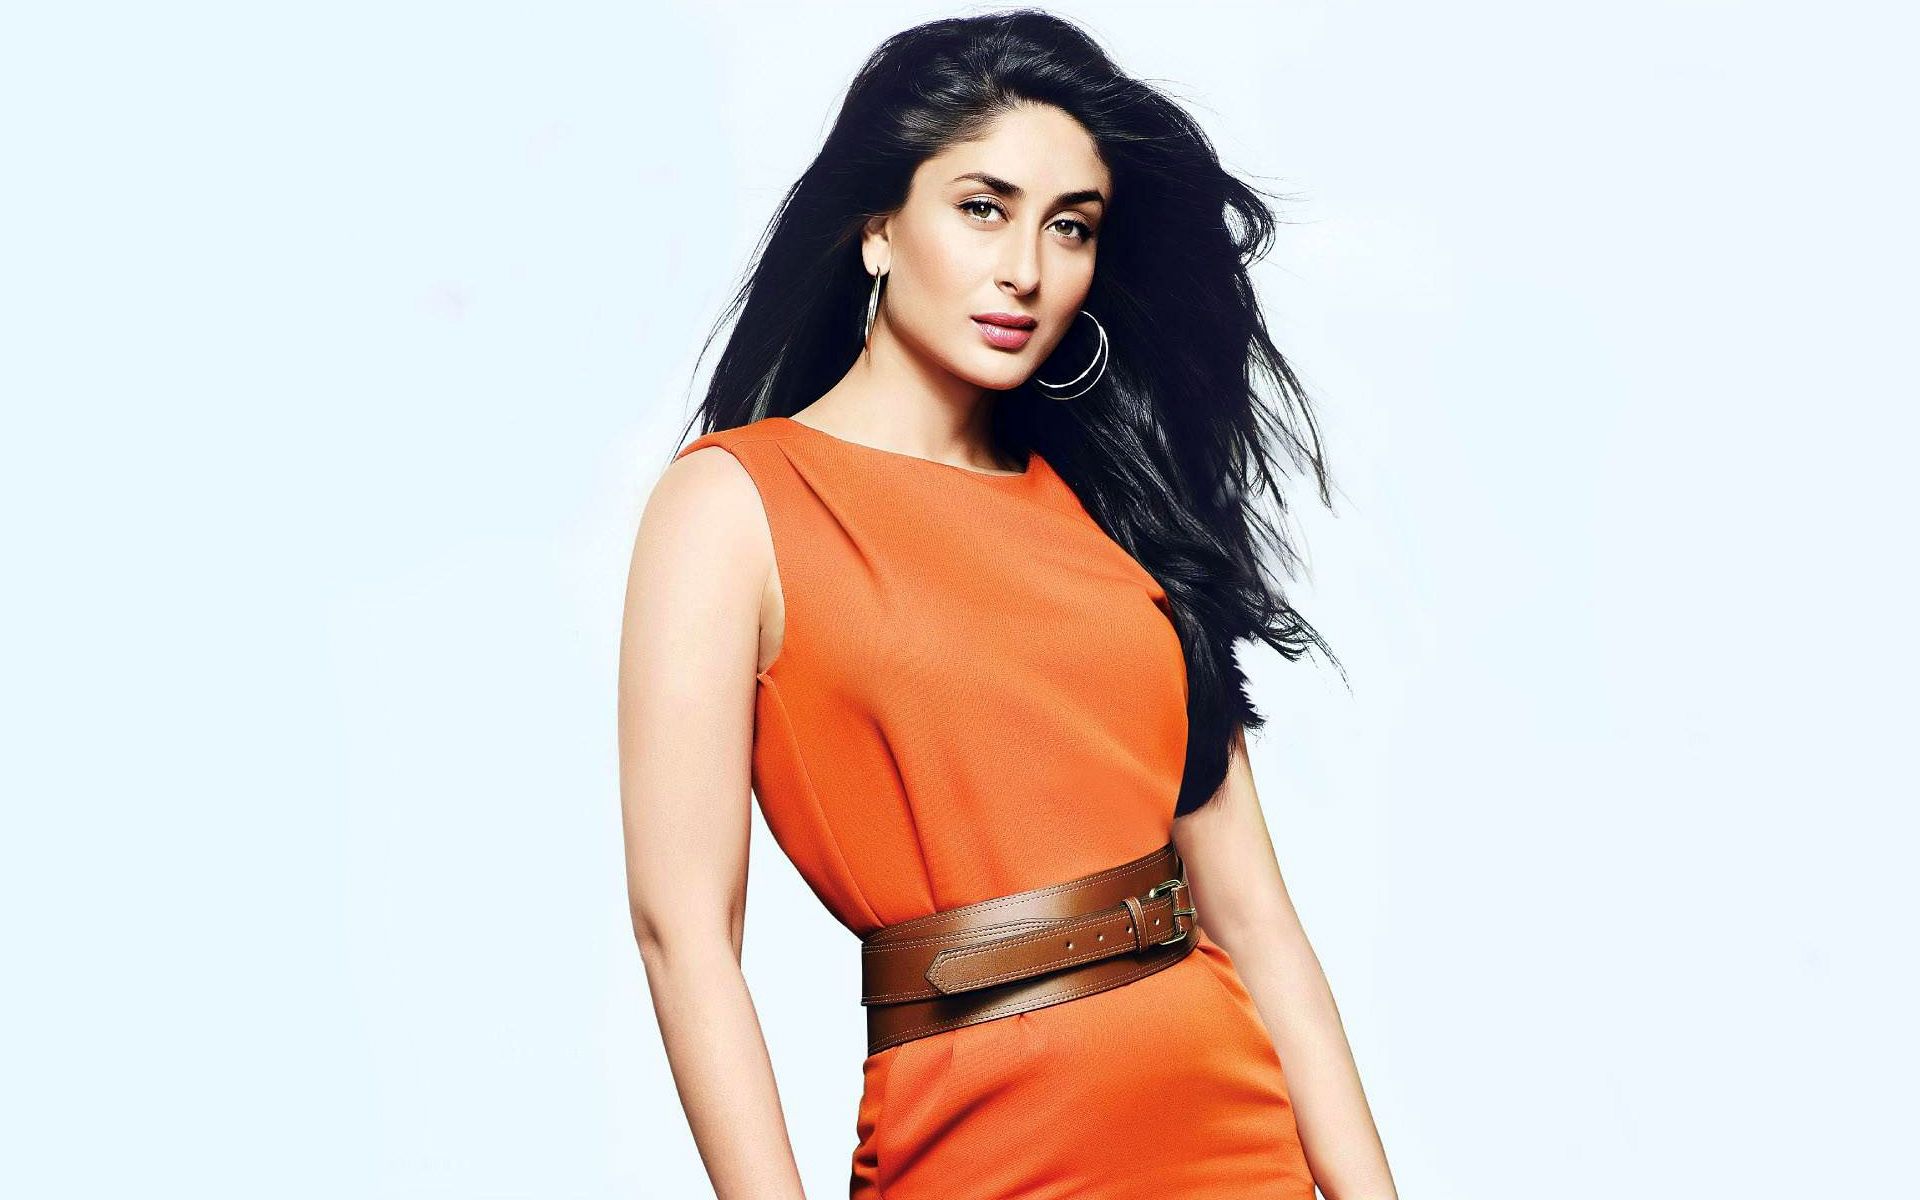 Kareena 4K wallpaper for your desktop or mobile screen free and easy to download